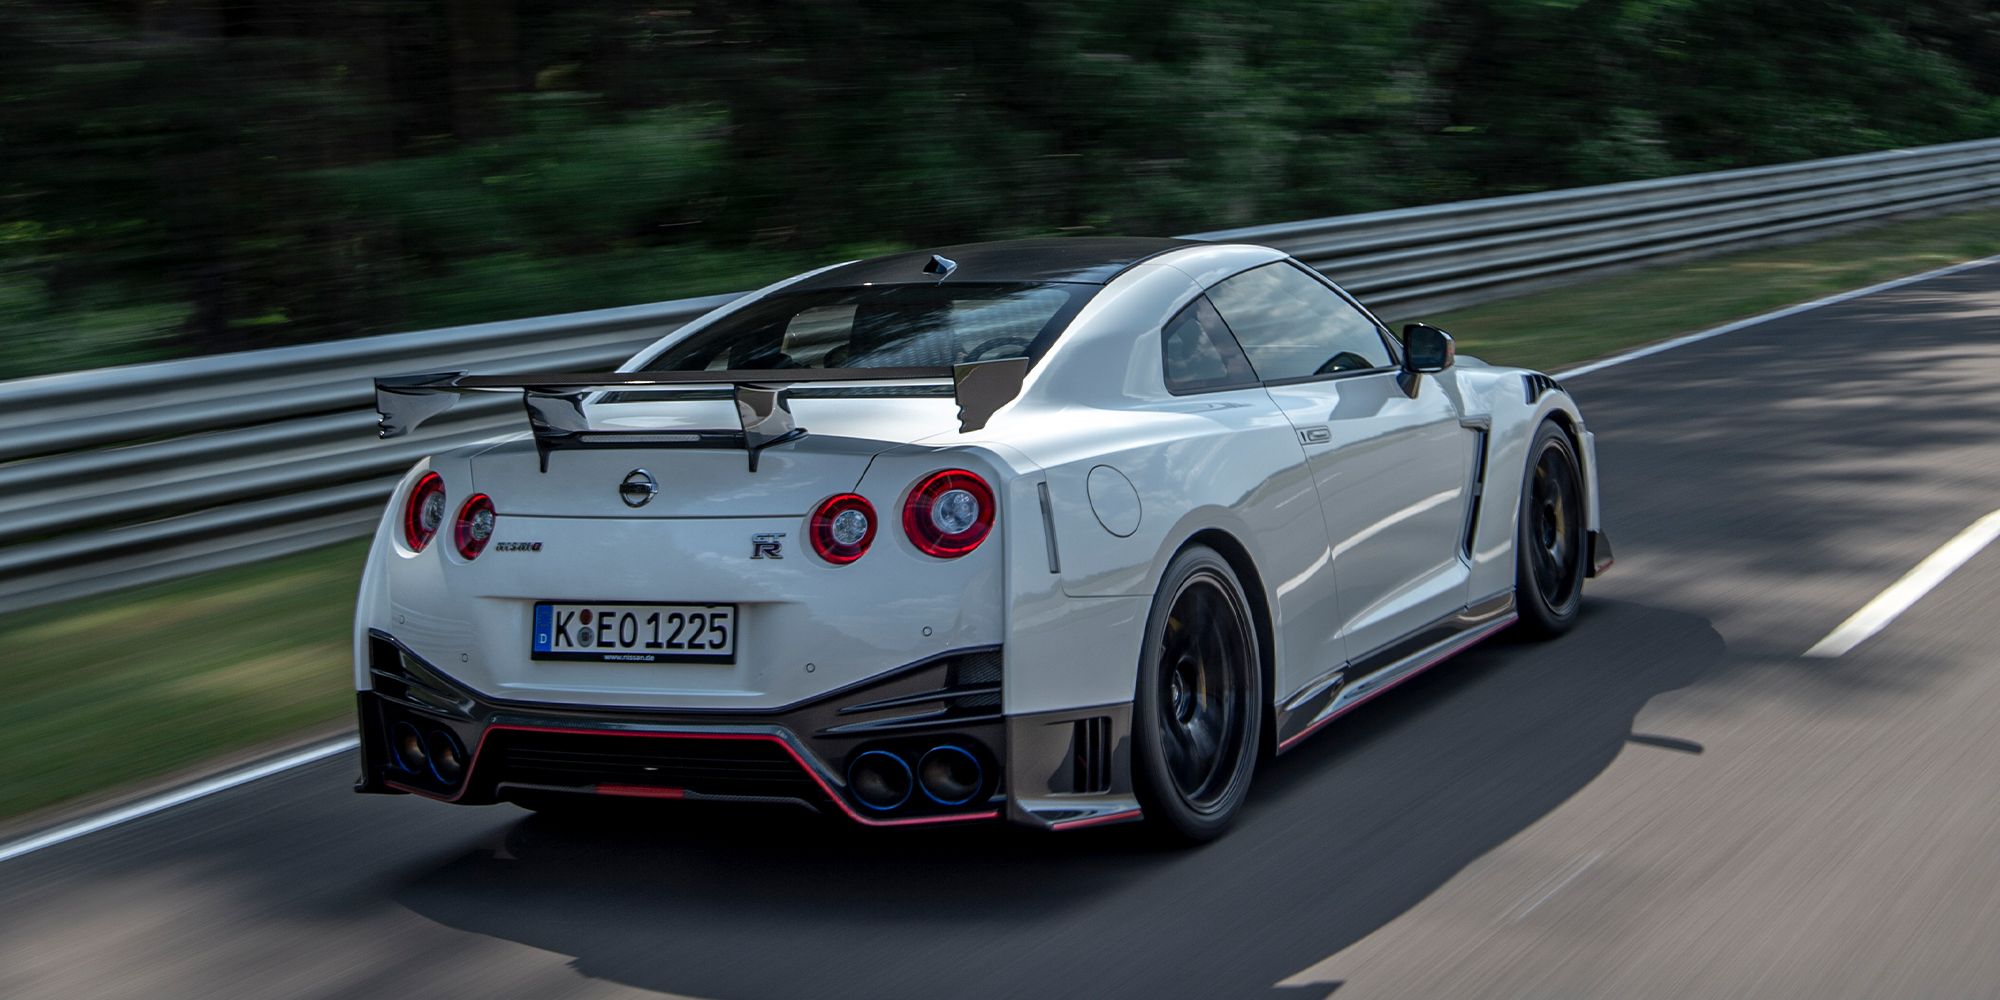 The rear of the GTR Nismo